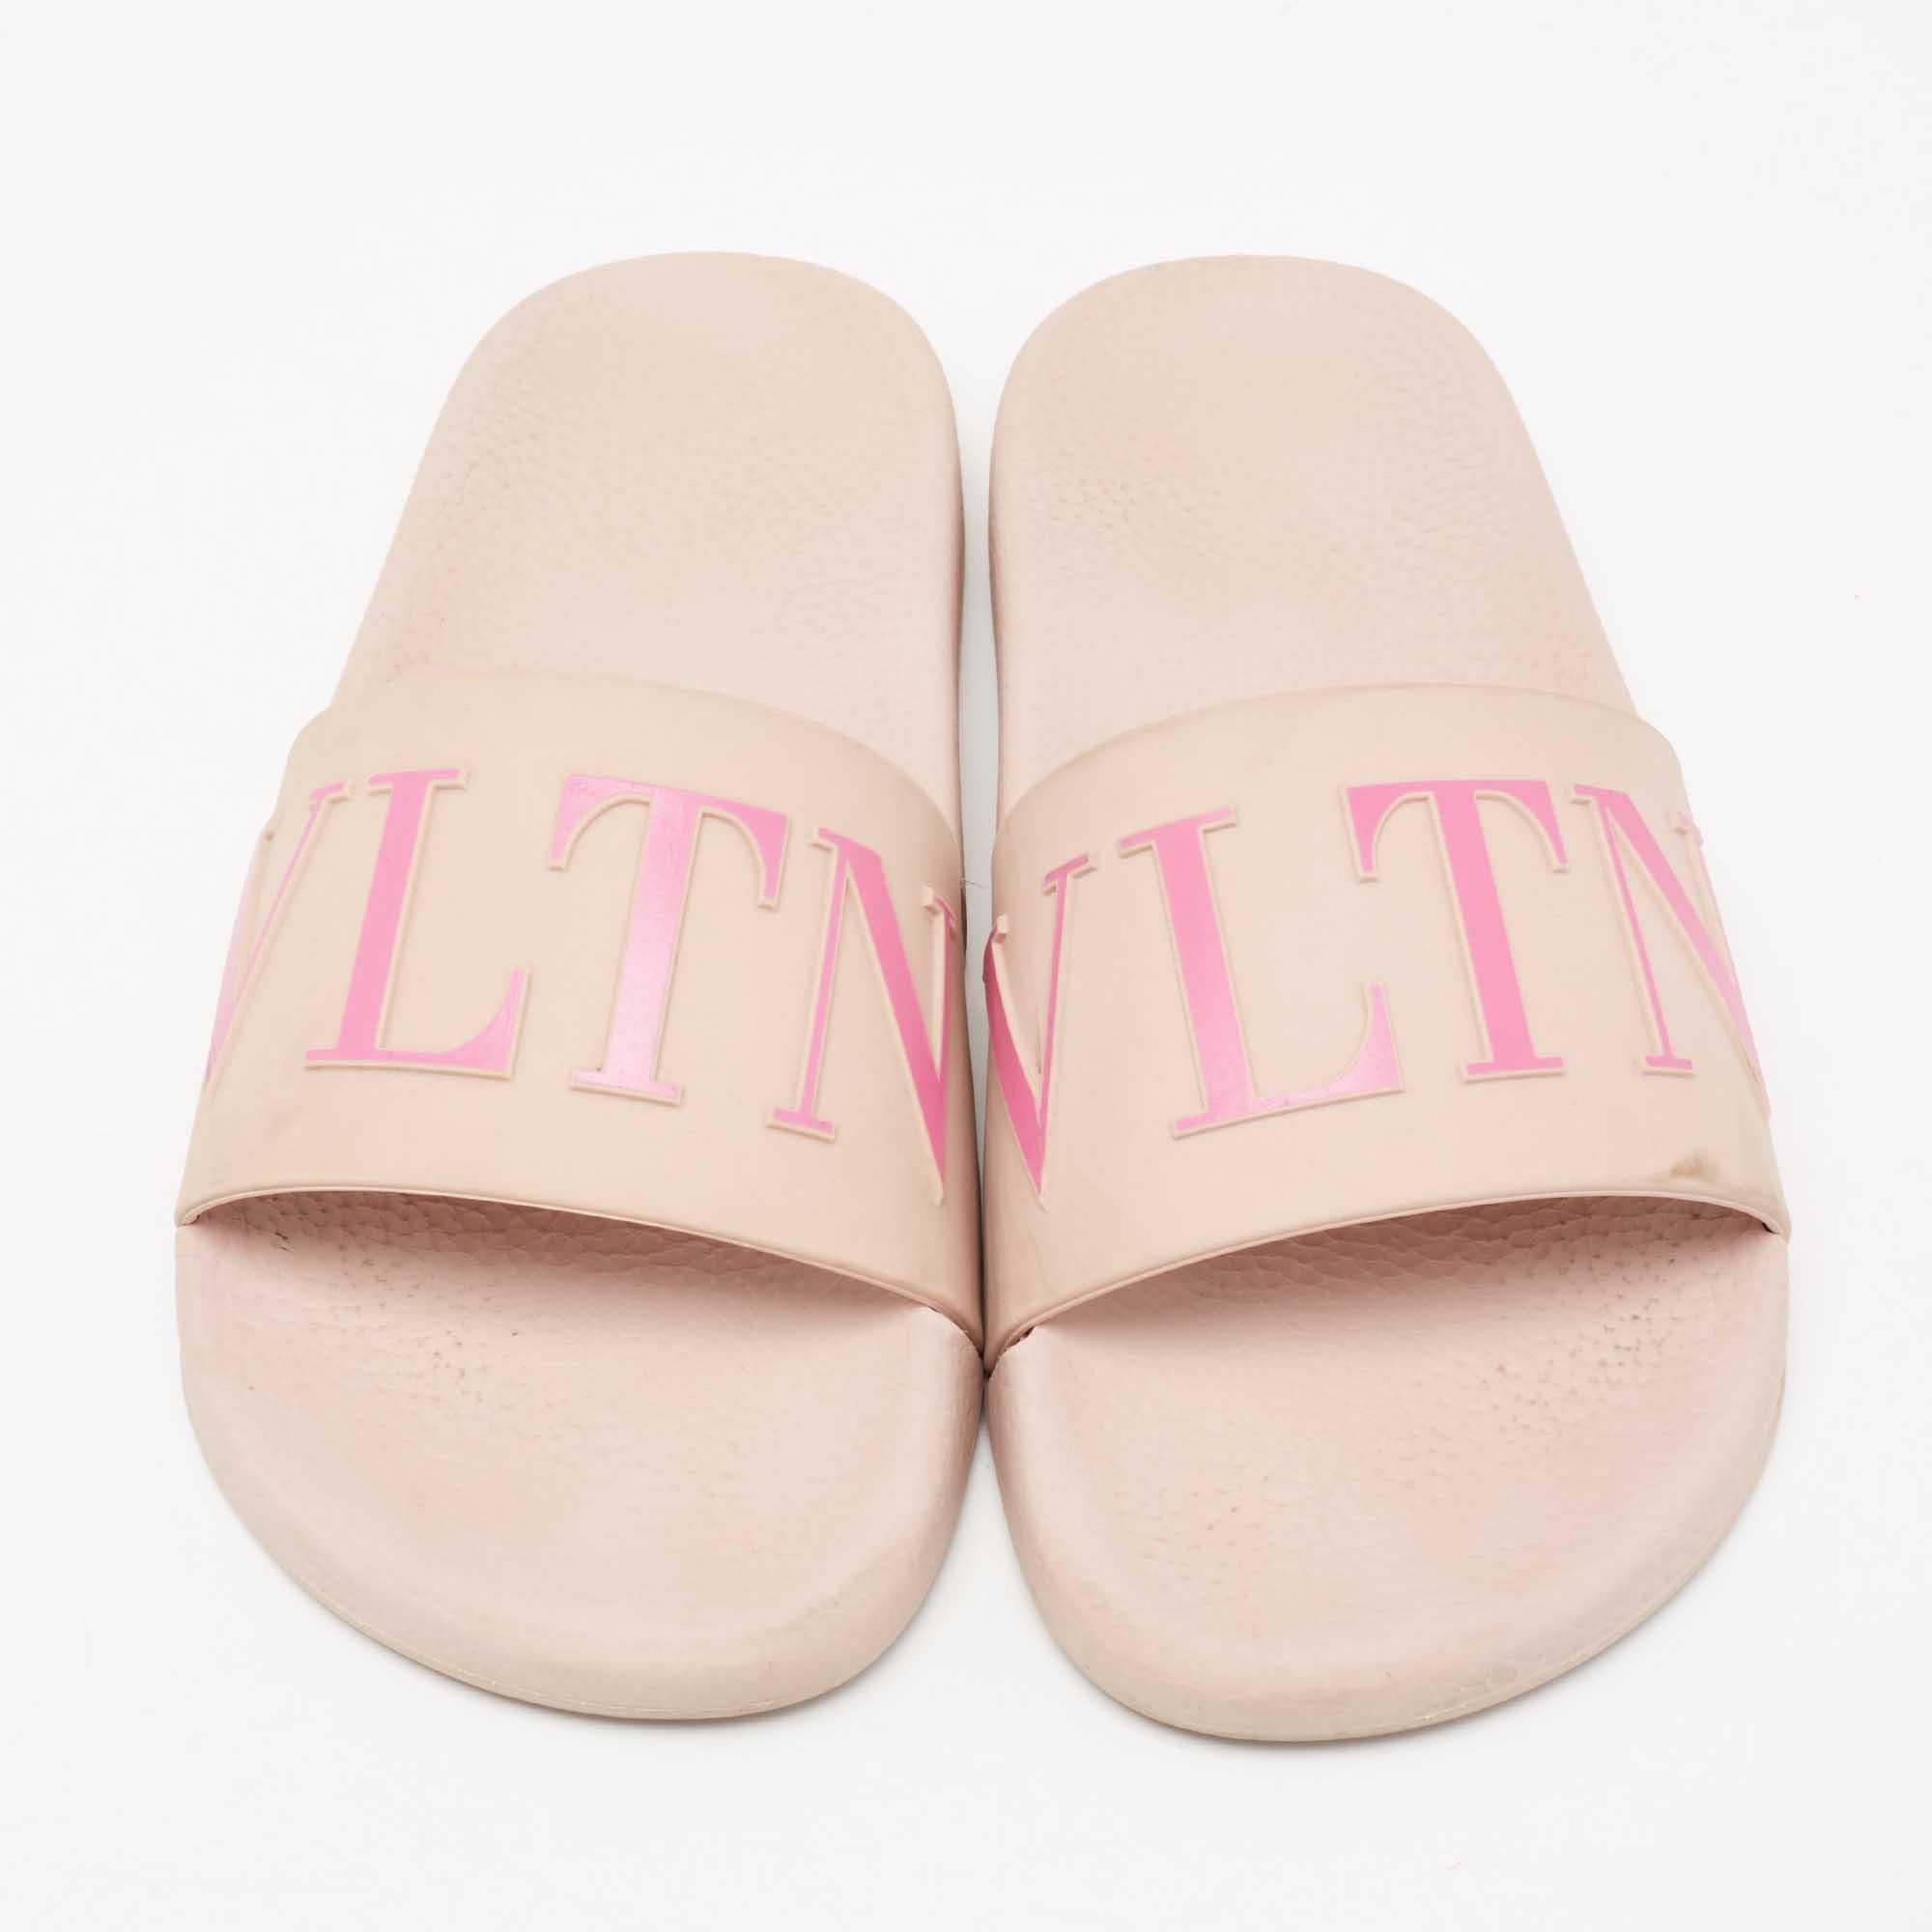 Comfort and style come together with these slide sandals from Valentino! The pink slides are crafted from rubber and feature an open-toe silhouette. They flaunt VLTN lettering on the vamp straps and are sure to make your feet very happy!

Includes: